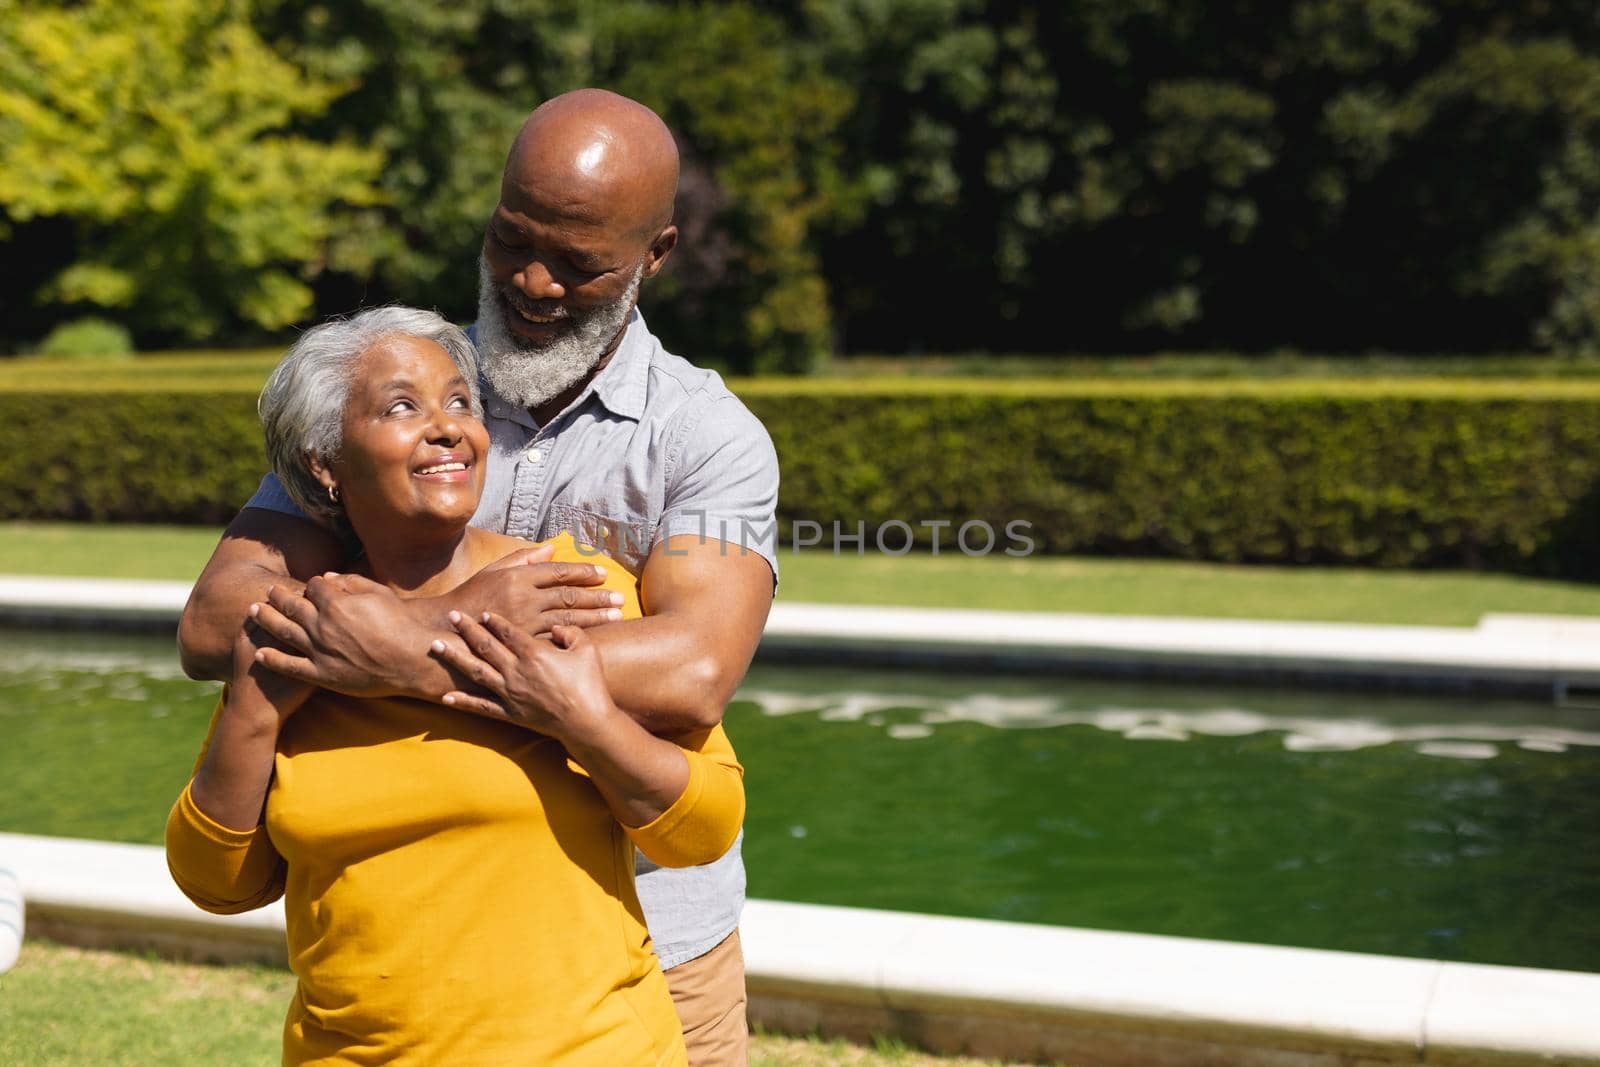 Senior african american couple spending time in sunny garden together embracing and smiling. retreat, retirement and happy senior lifestyle concept.